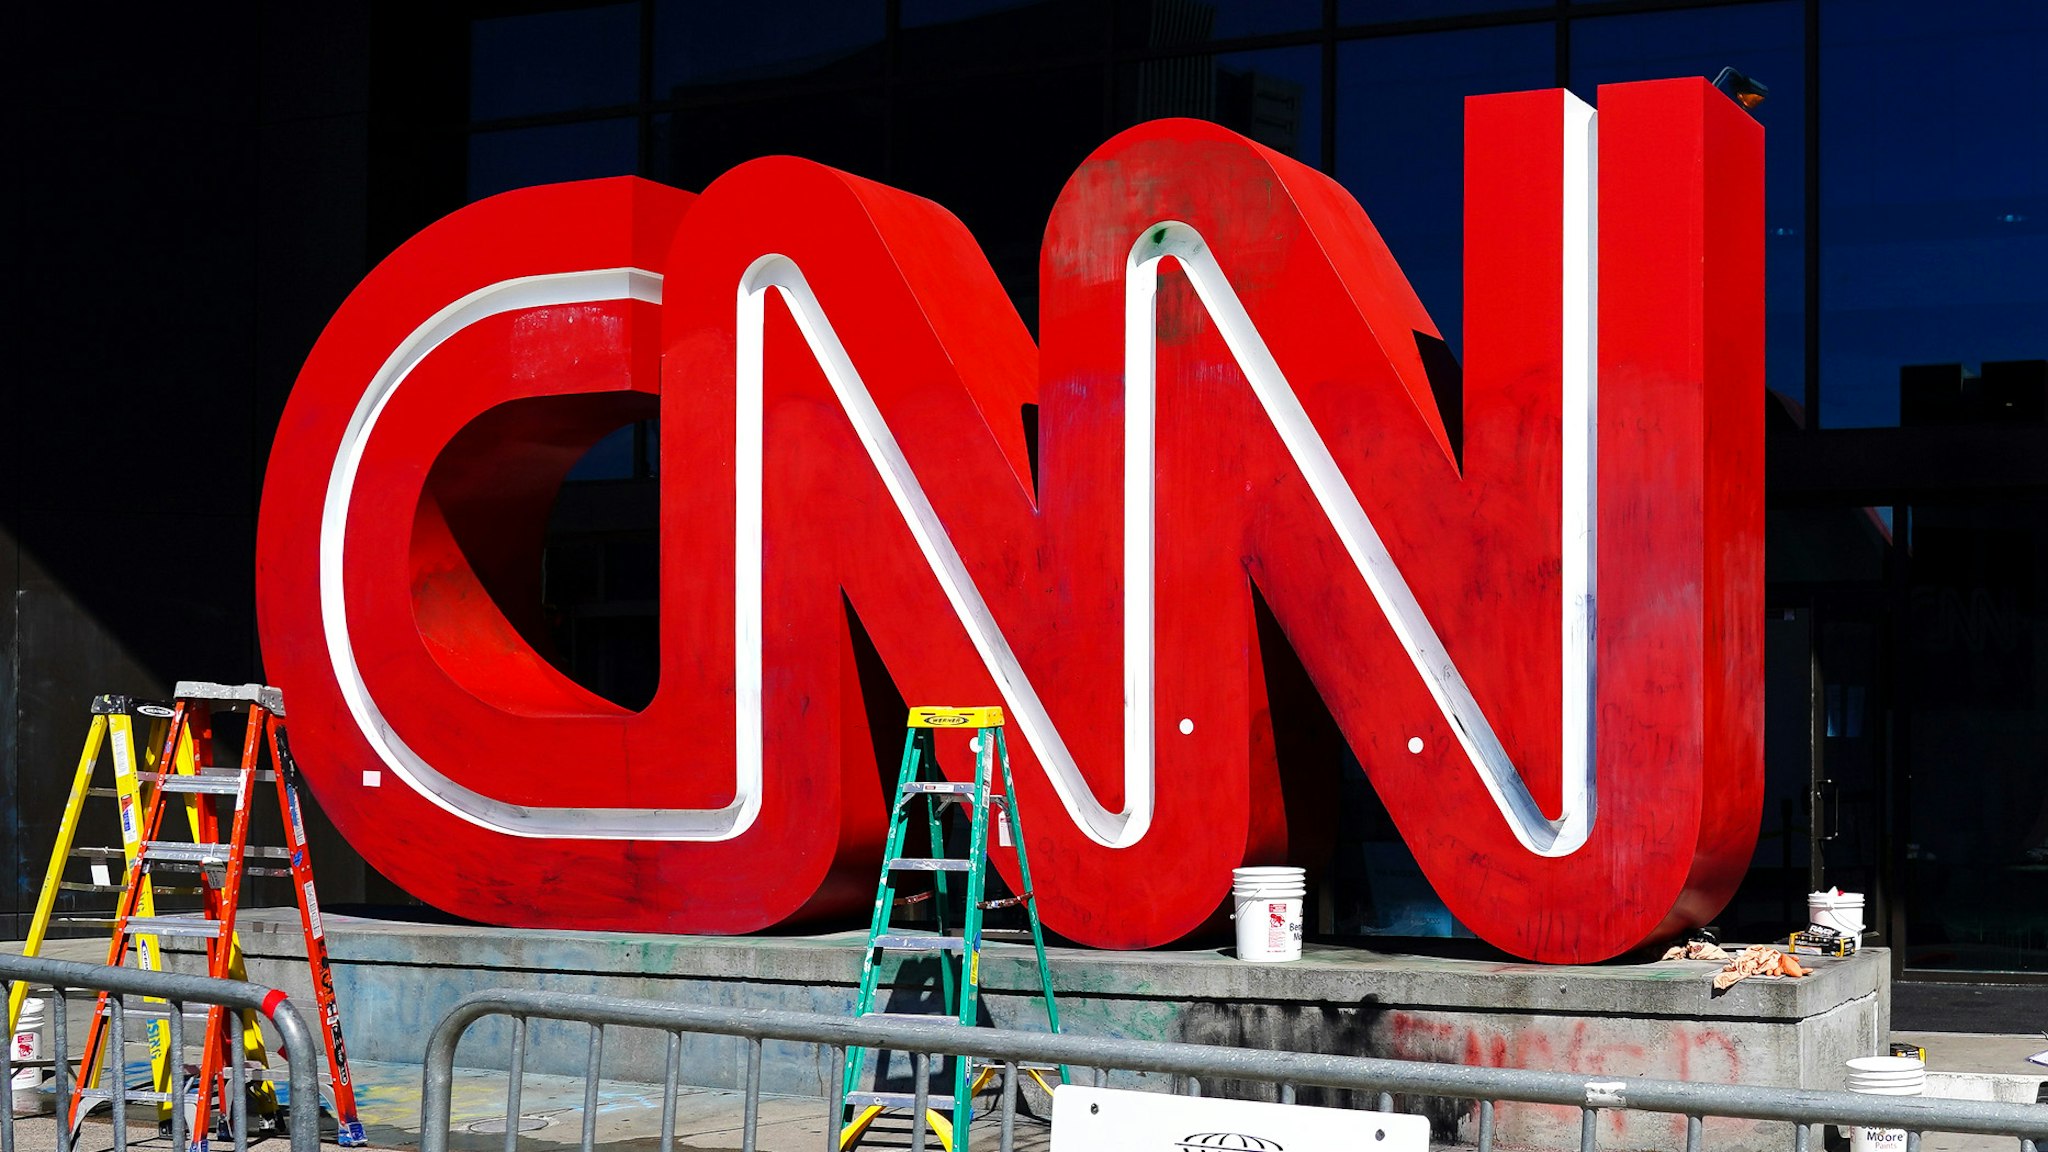 ATLANTA, GA - MAY 30: A woman takes a photo of the CNN sign following an overnight demonstration over the Minneapolis death of George Floyd while in police custody on May 30, 2020 in Atlanta, Georgia. Demonstrations are being held across the U.S. after George Floyd died in police custody on May 25th in Minneapolis, Minnesota.